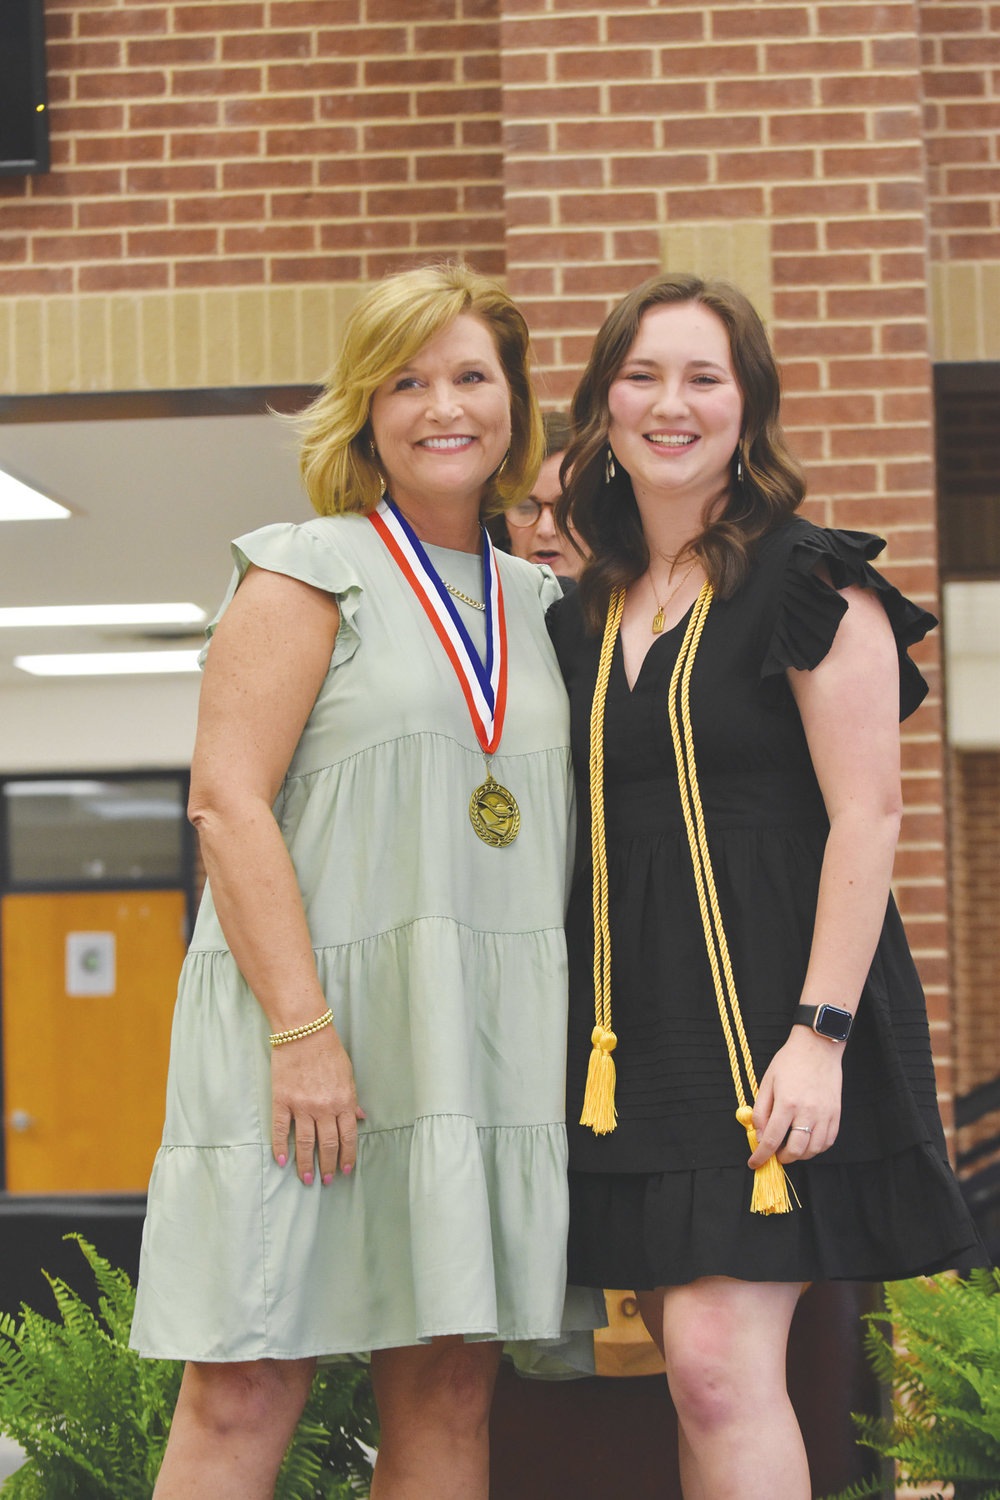 Madeleine Gass is the daughter of Justin and Natalie Gass. Madeleine plans to attend Texas A&M University, majoring in biomedical science and minoring in business. She plans to attend Texas A&M’s veterinary school and become a veterinarian. Madeleine honored Mrs. Cyndee Bowden.